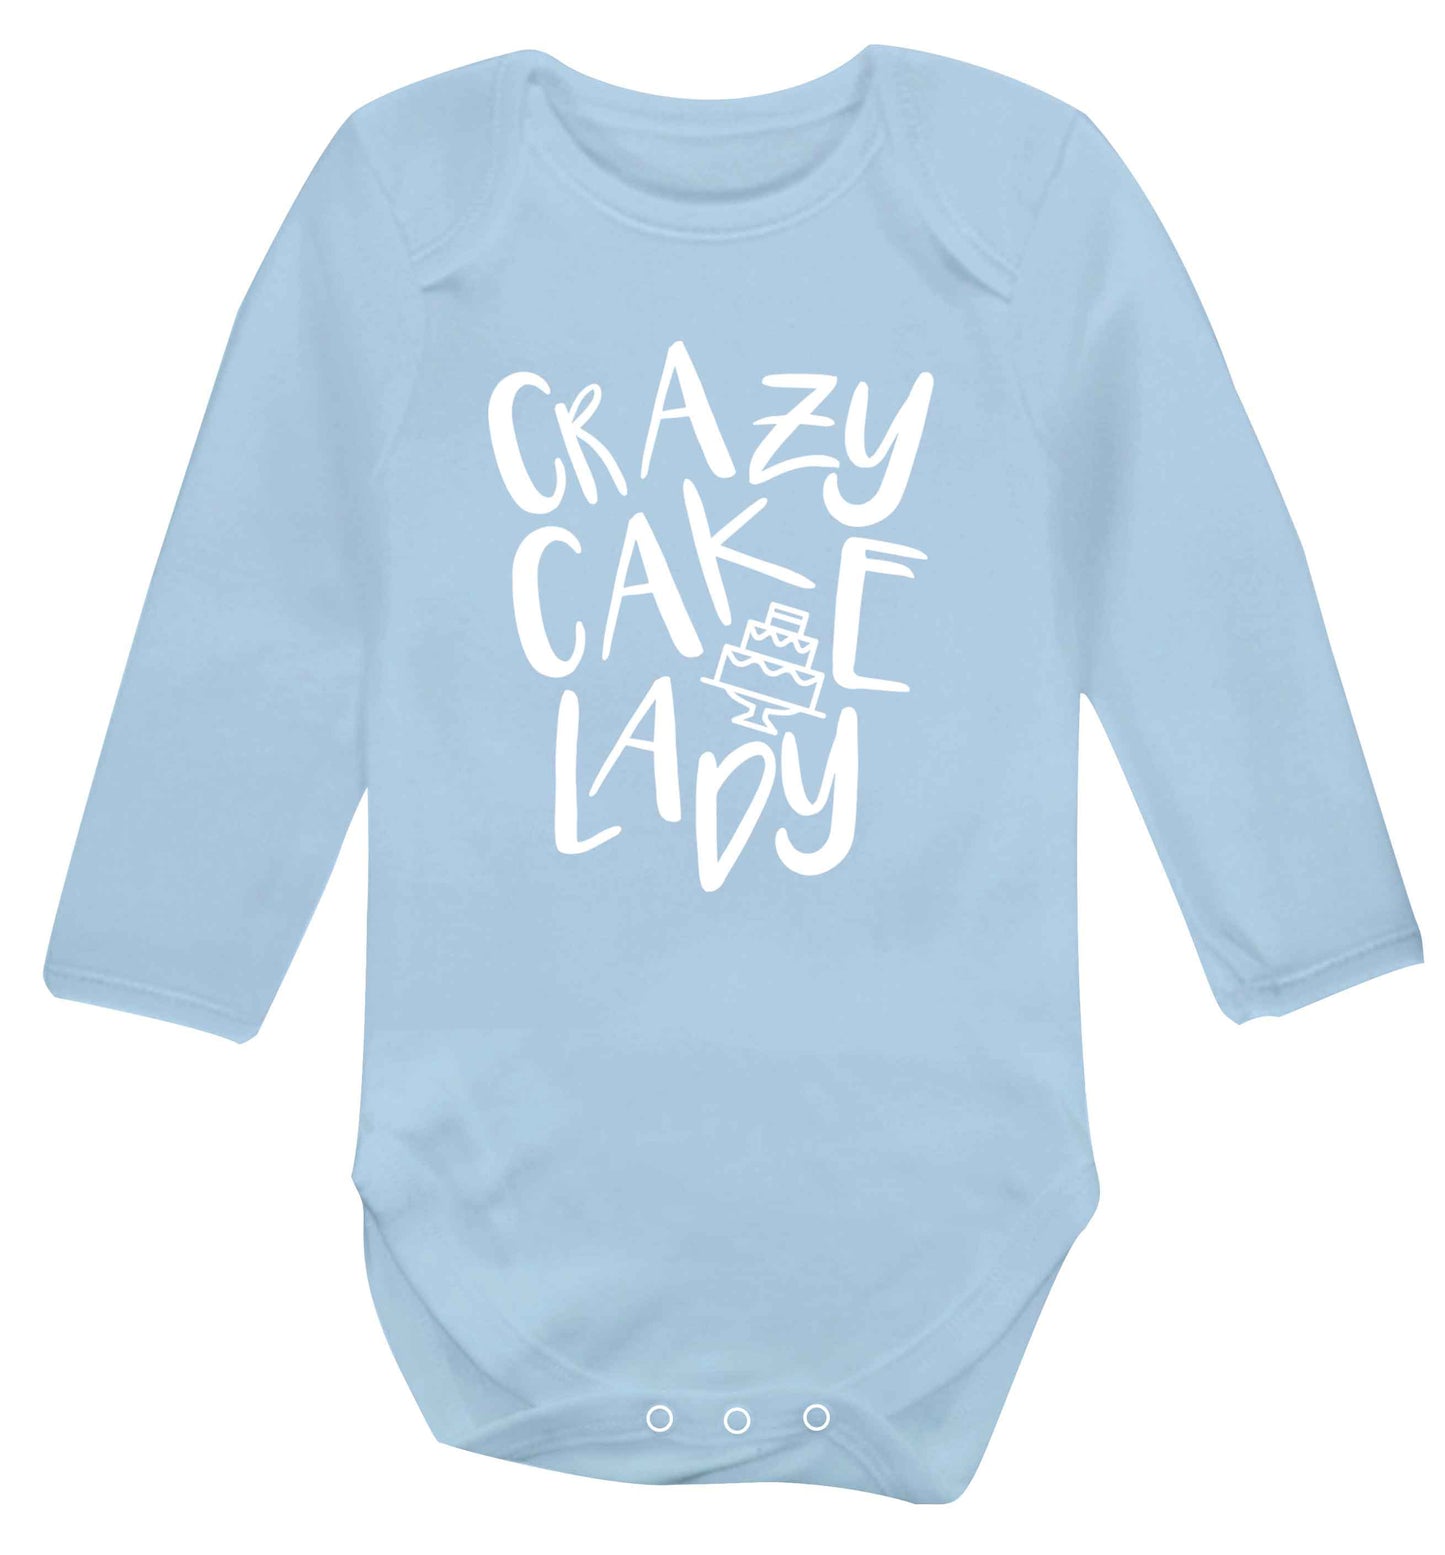 Crazy cake lady Baby Vest long sleeved pale blue 6-12 months